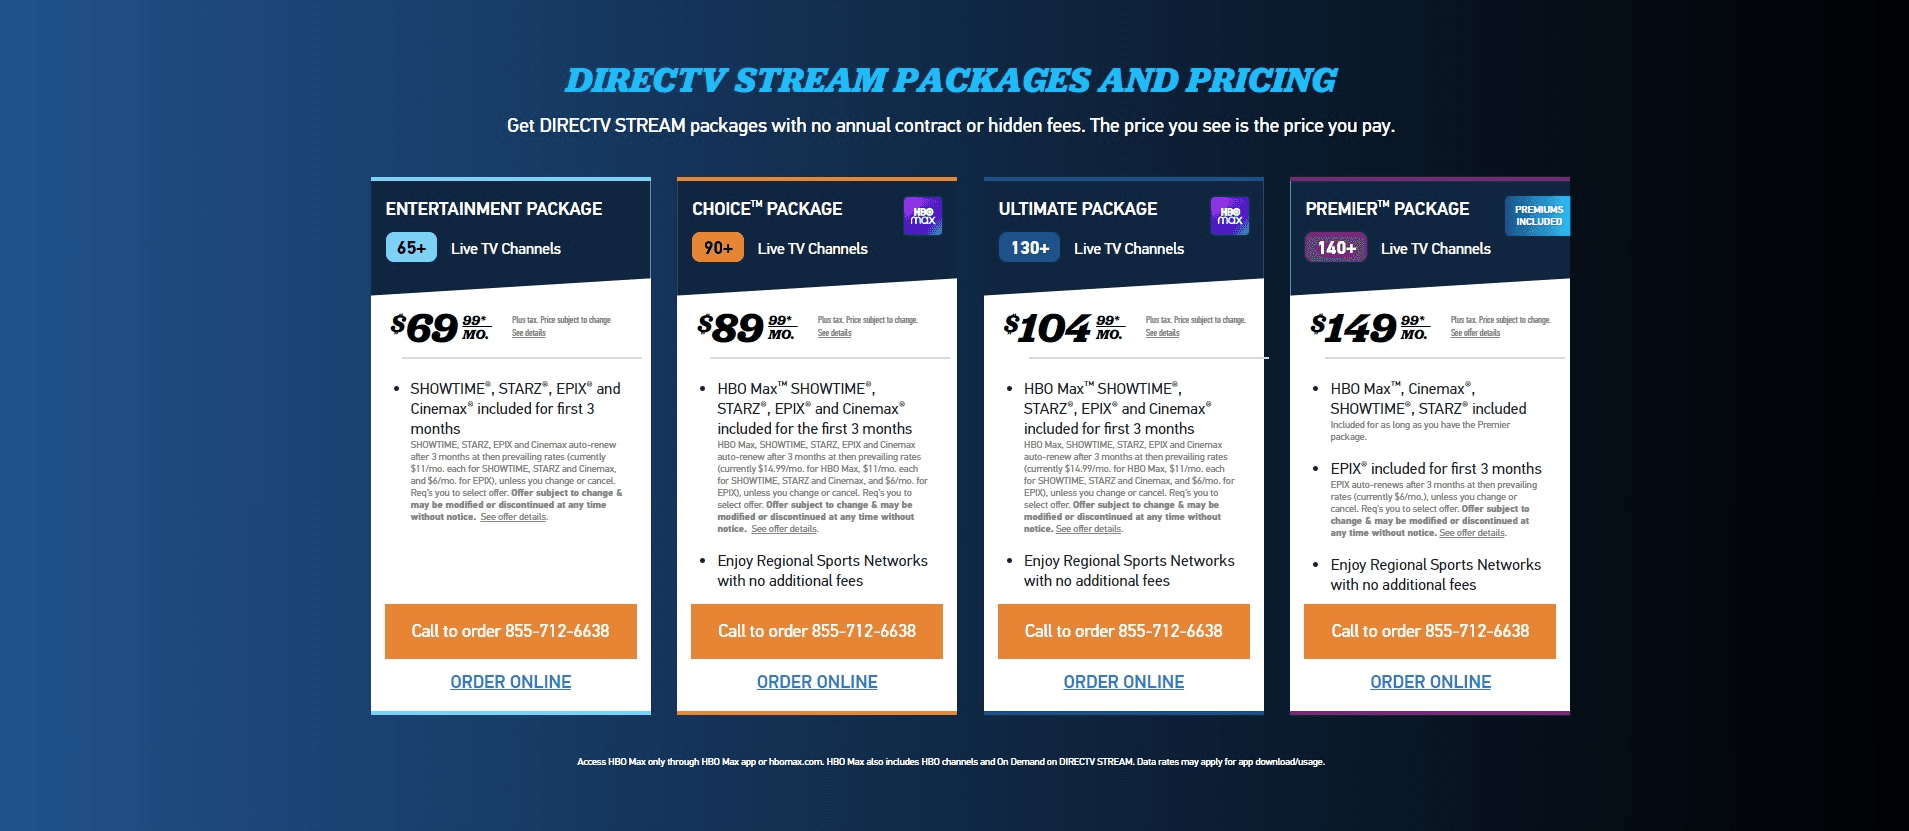 DirecTV Stream Packages: cost